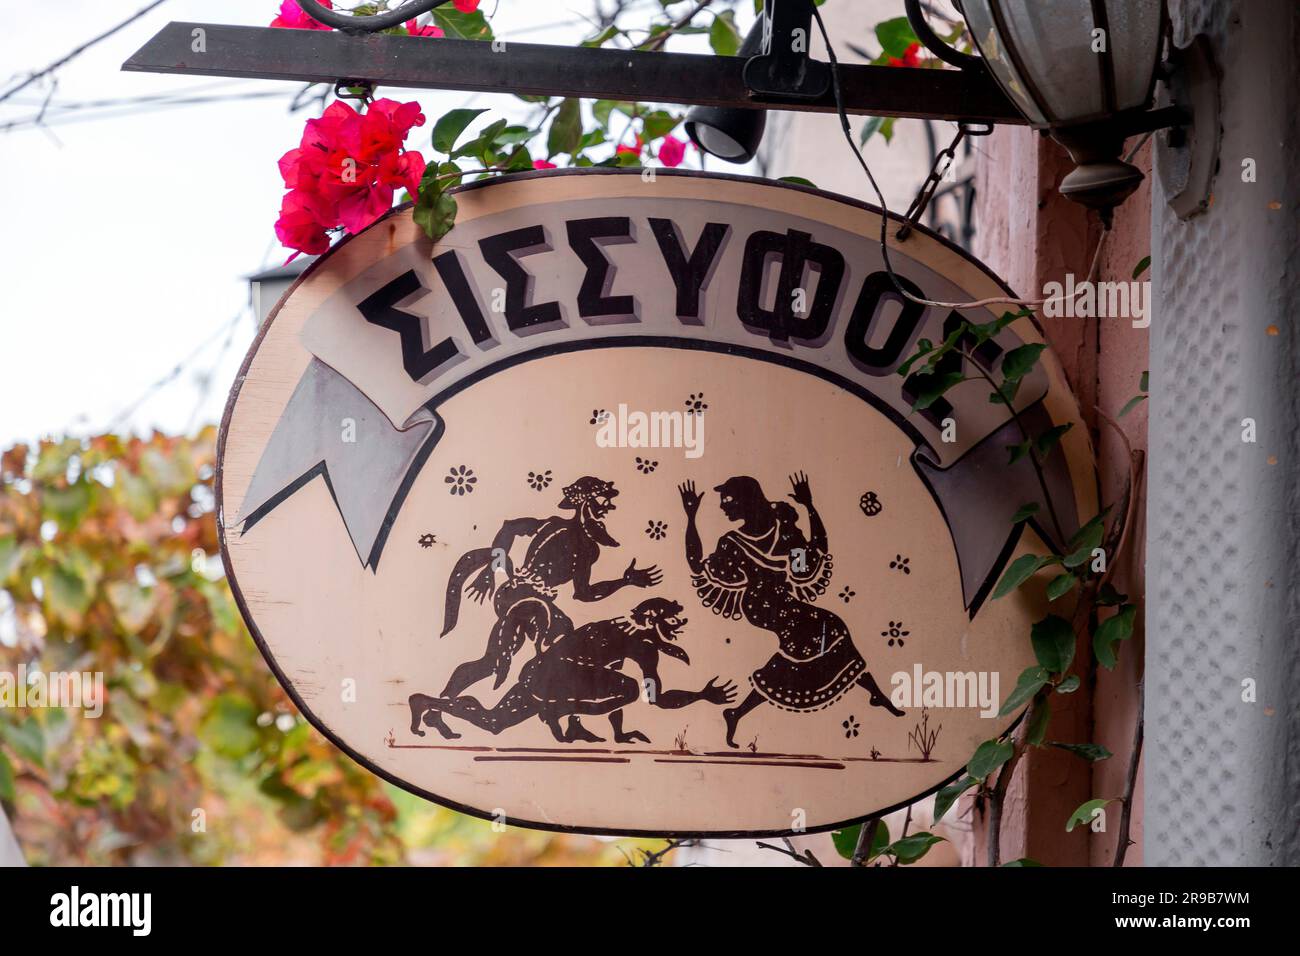 Athens, Greece - 25 Nov 2021: Metal signage of a caffe in Plaka district of Athens. The Greek writing translates as Sissyphos. Stock Photo